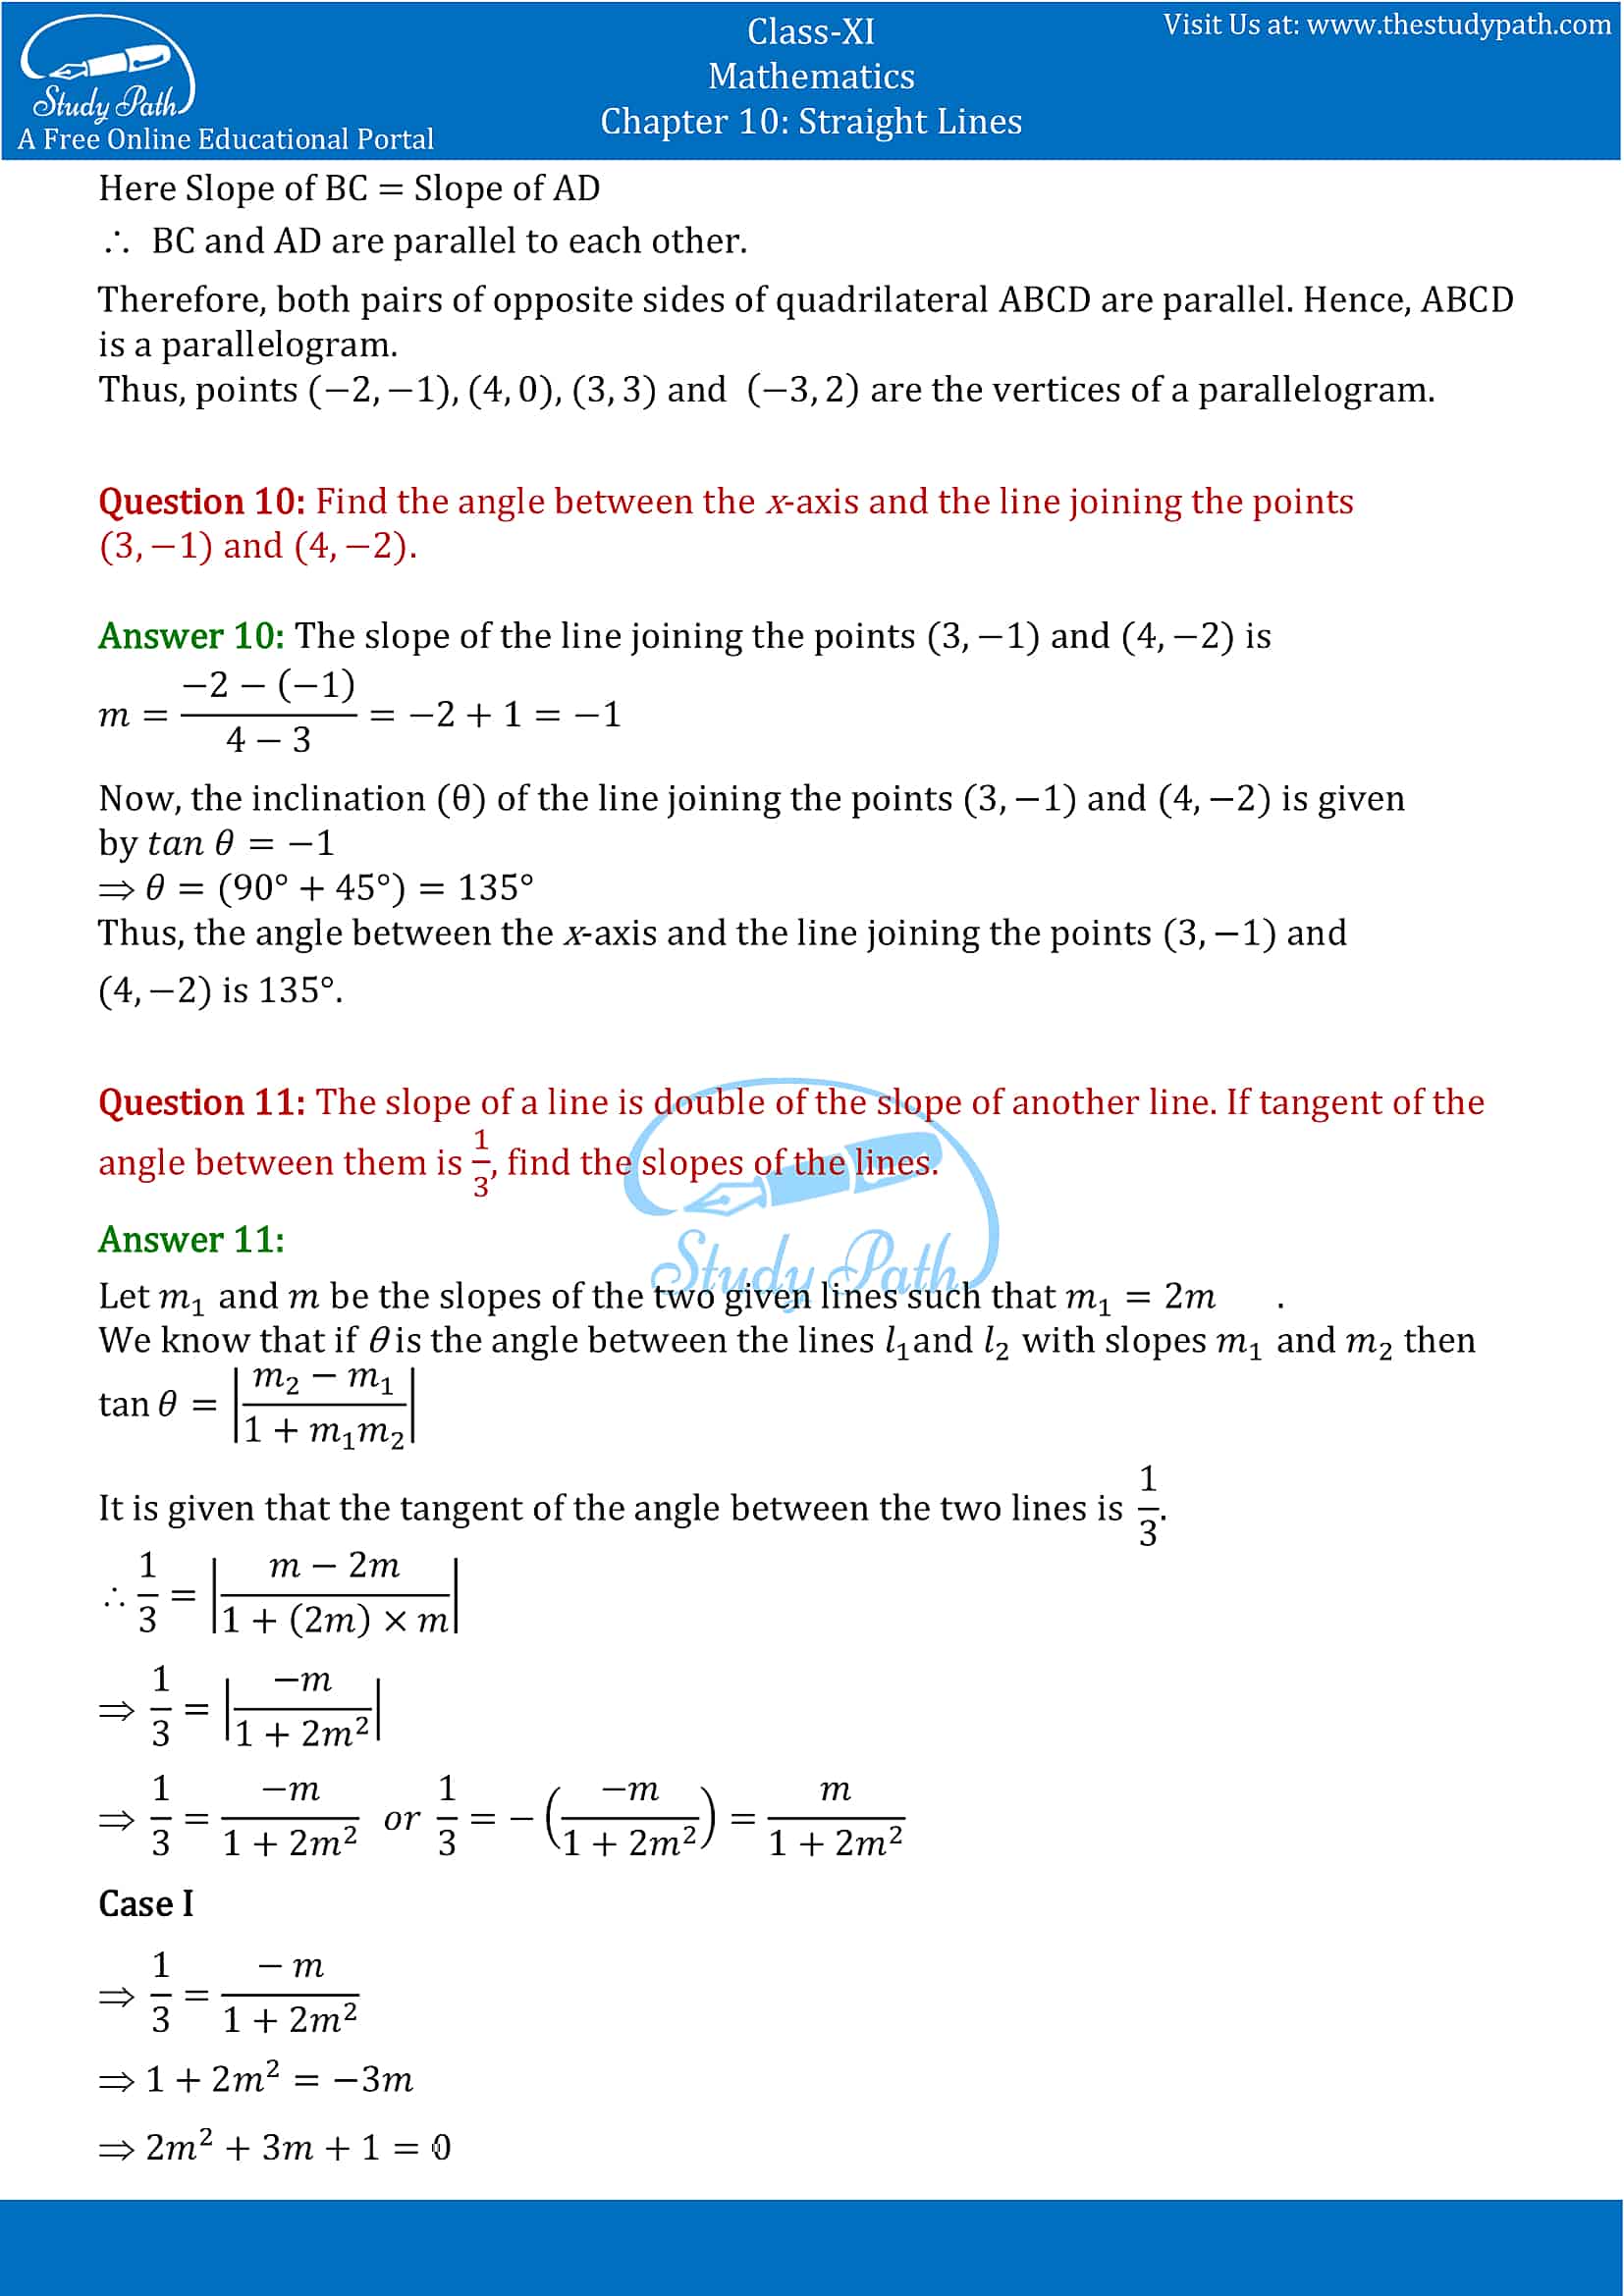 NCERT Solutions for Class 11 Maths chapter 10 Straight Lines Exercise 10.1 Part-6